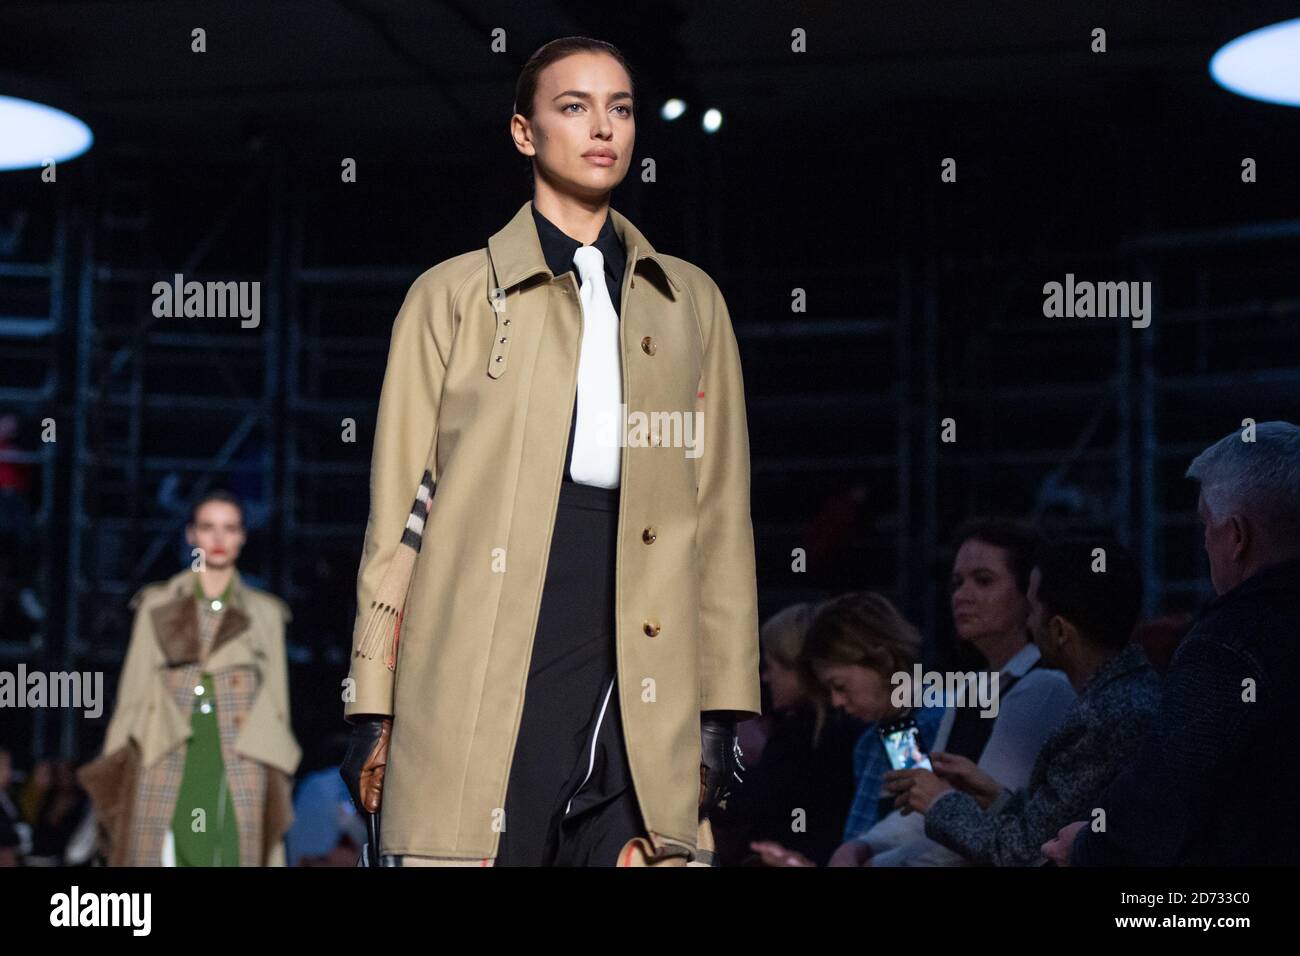 Irina Shayk on the catwalk during the Burberry fashion show, held at Tate  Modern, as part of London Fashion Week A/W 2019. Picture date: Sunday  February 17, 2018. Photo credit should read: